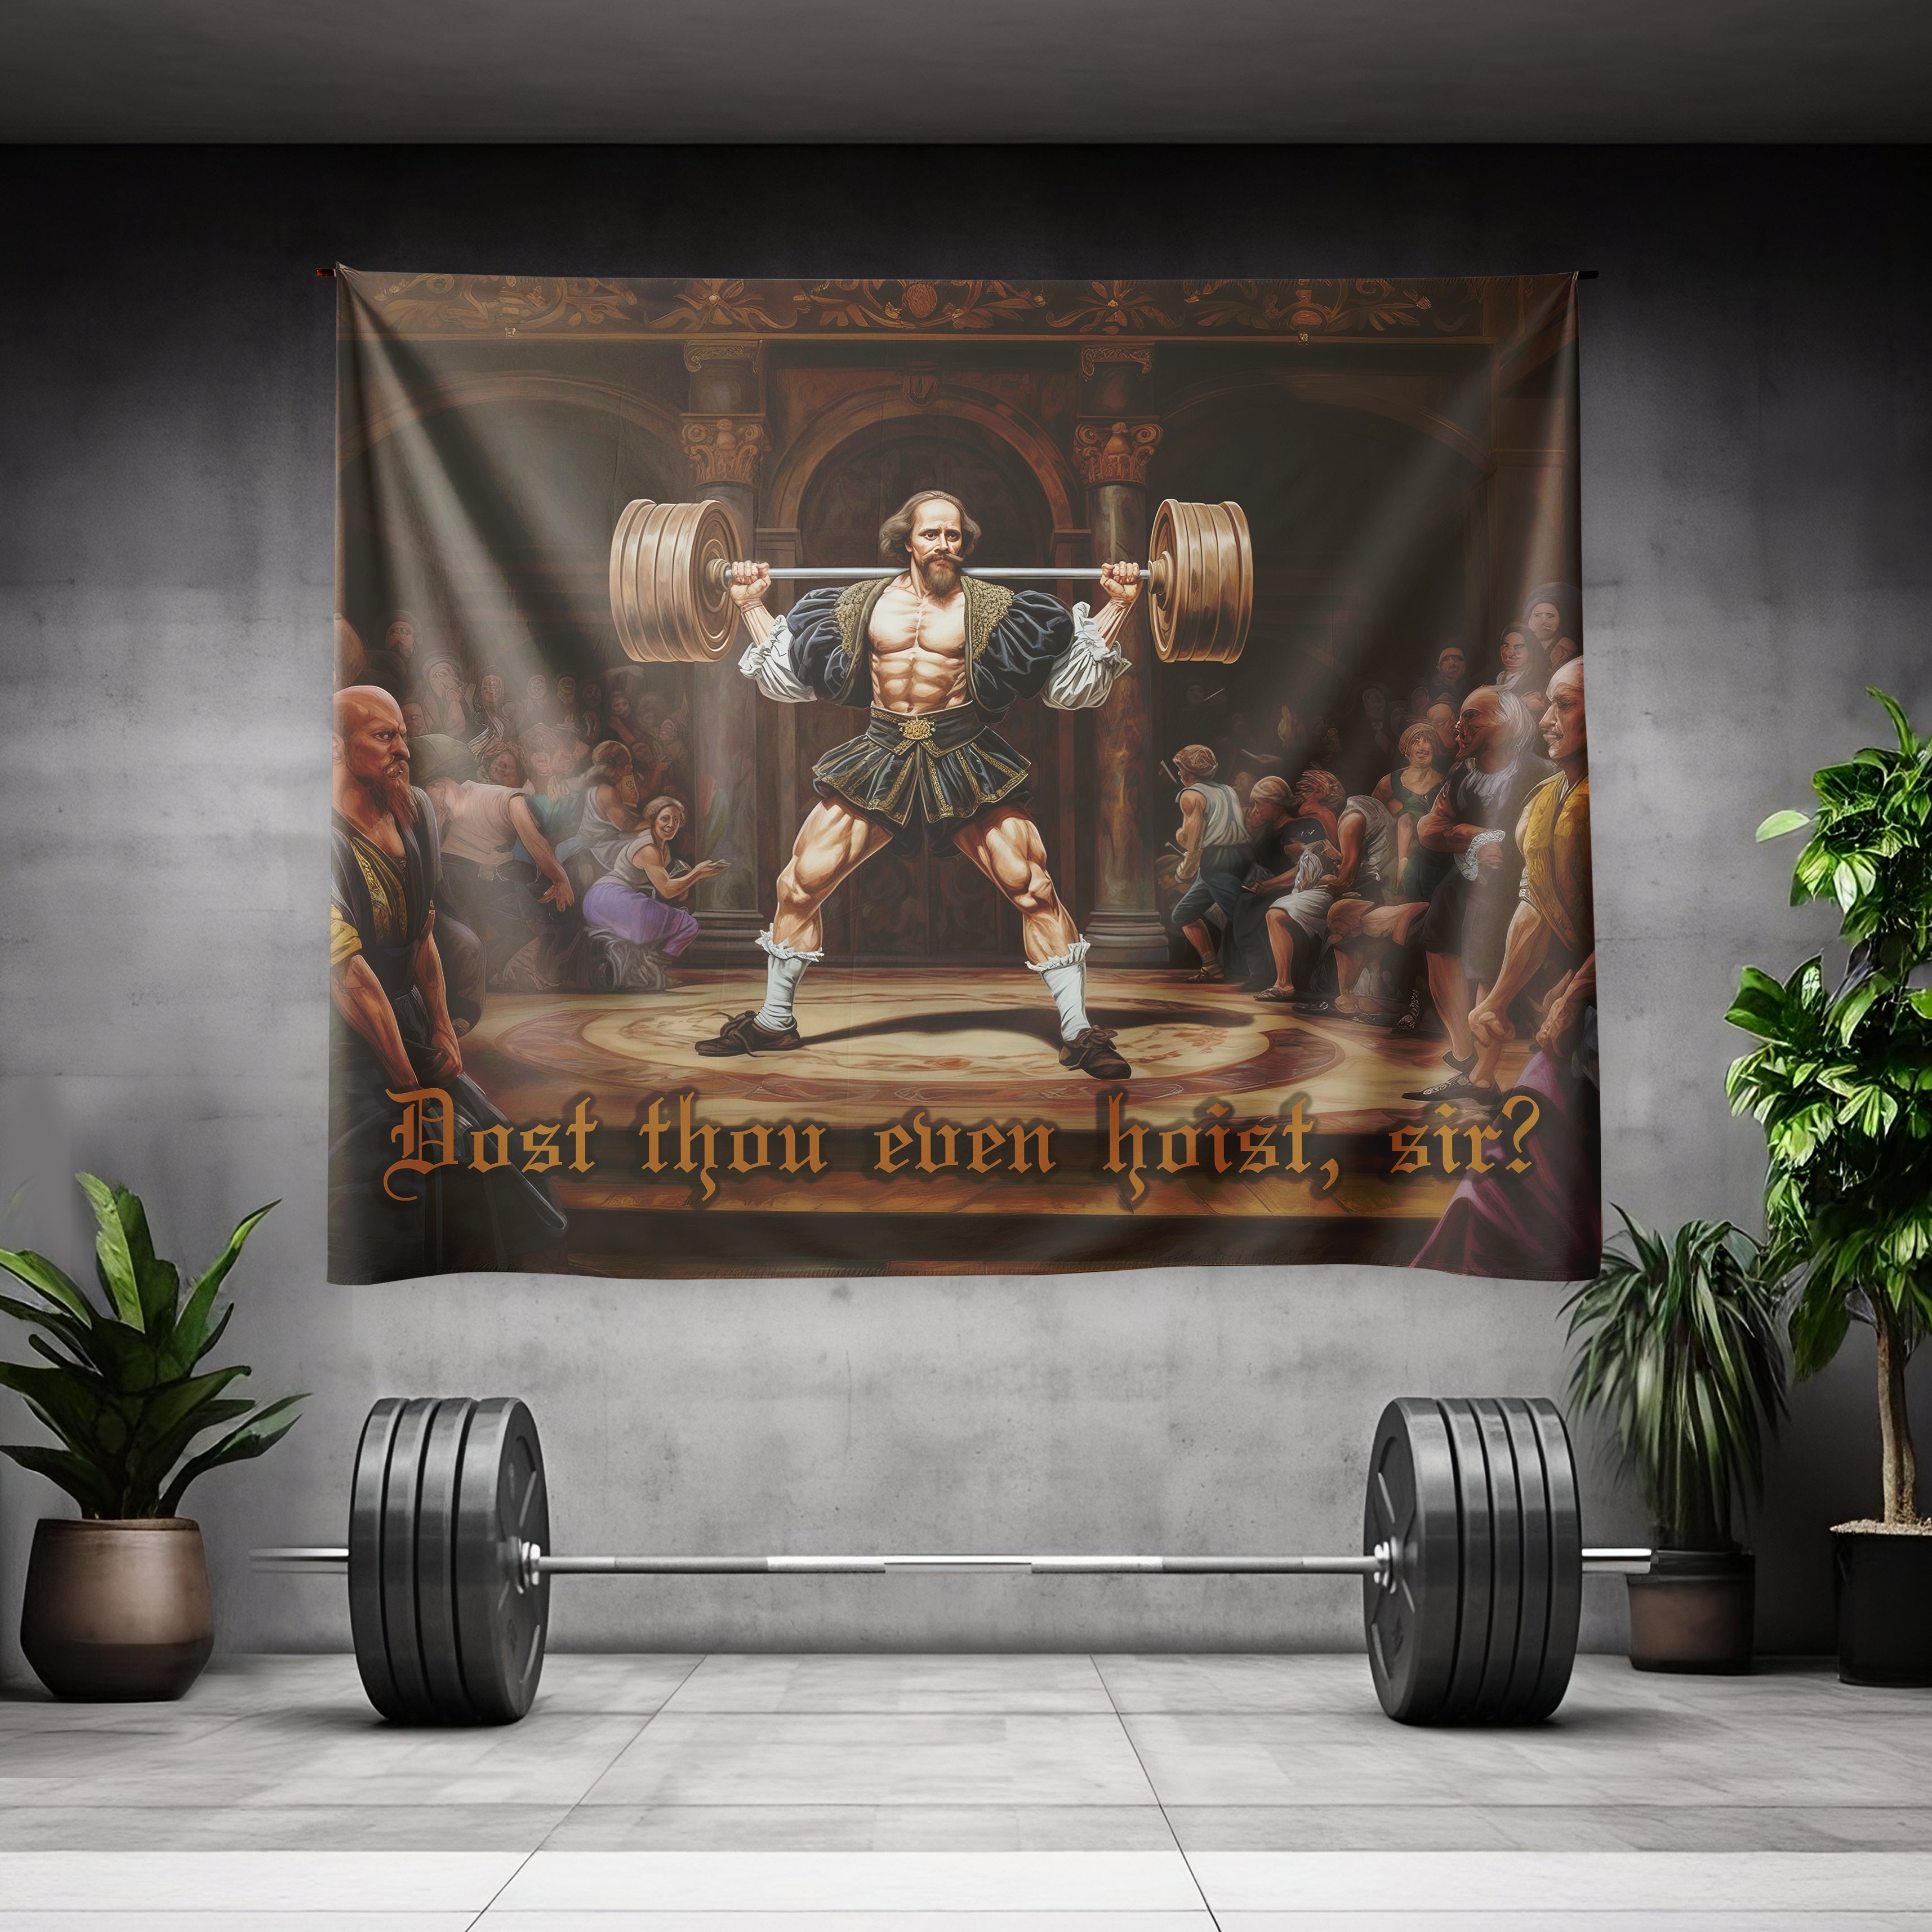 Gym Flag - Authentic Garage Gym Flags & Workout Flags | "Dost Thou Even Hoist, Sir?" Banner 11262